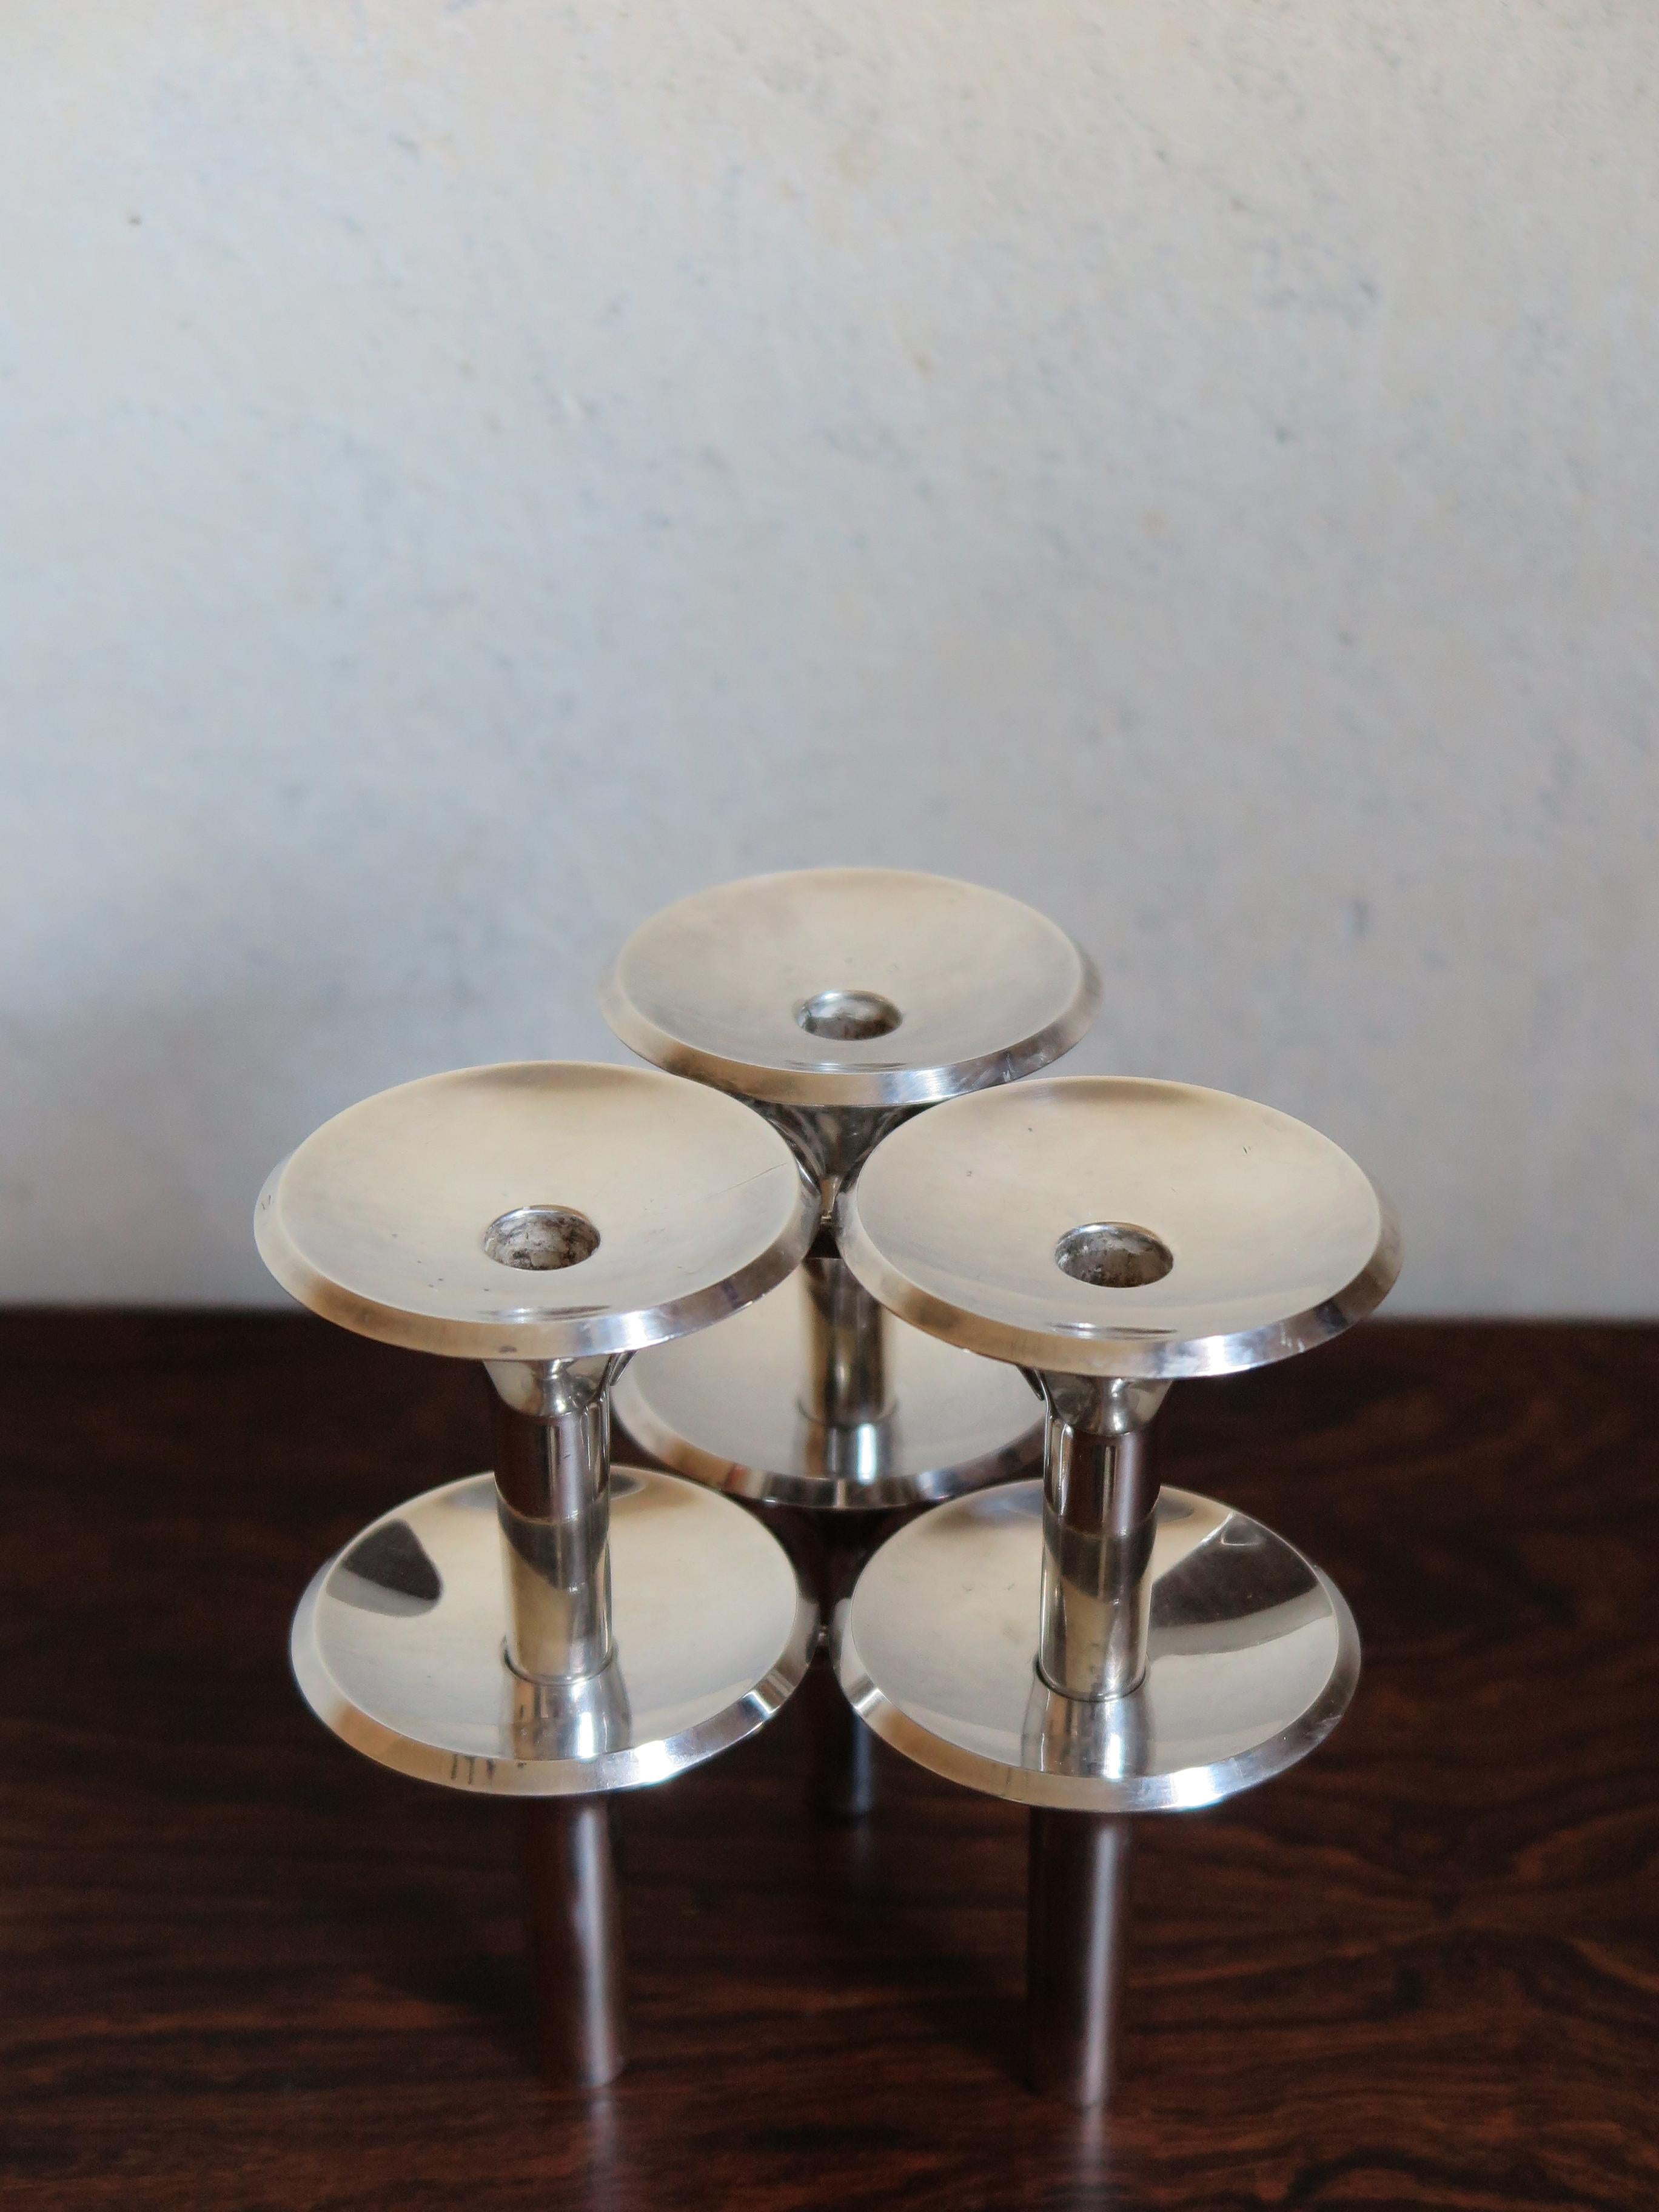 Ceasar Stoffi e Fritz Nagel Candleholders for BMF in Chromed Metal, 1960s For Sale 3